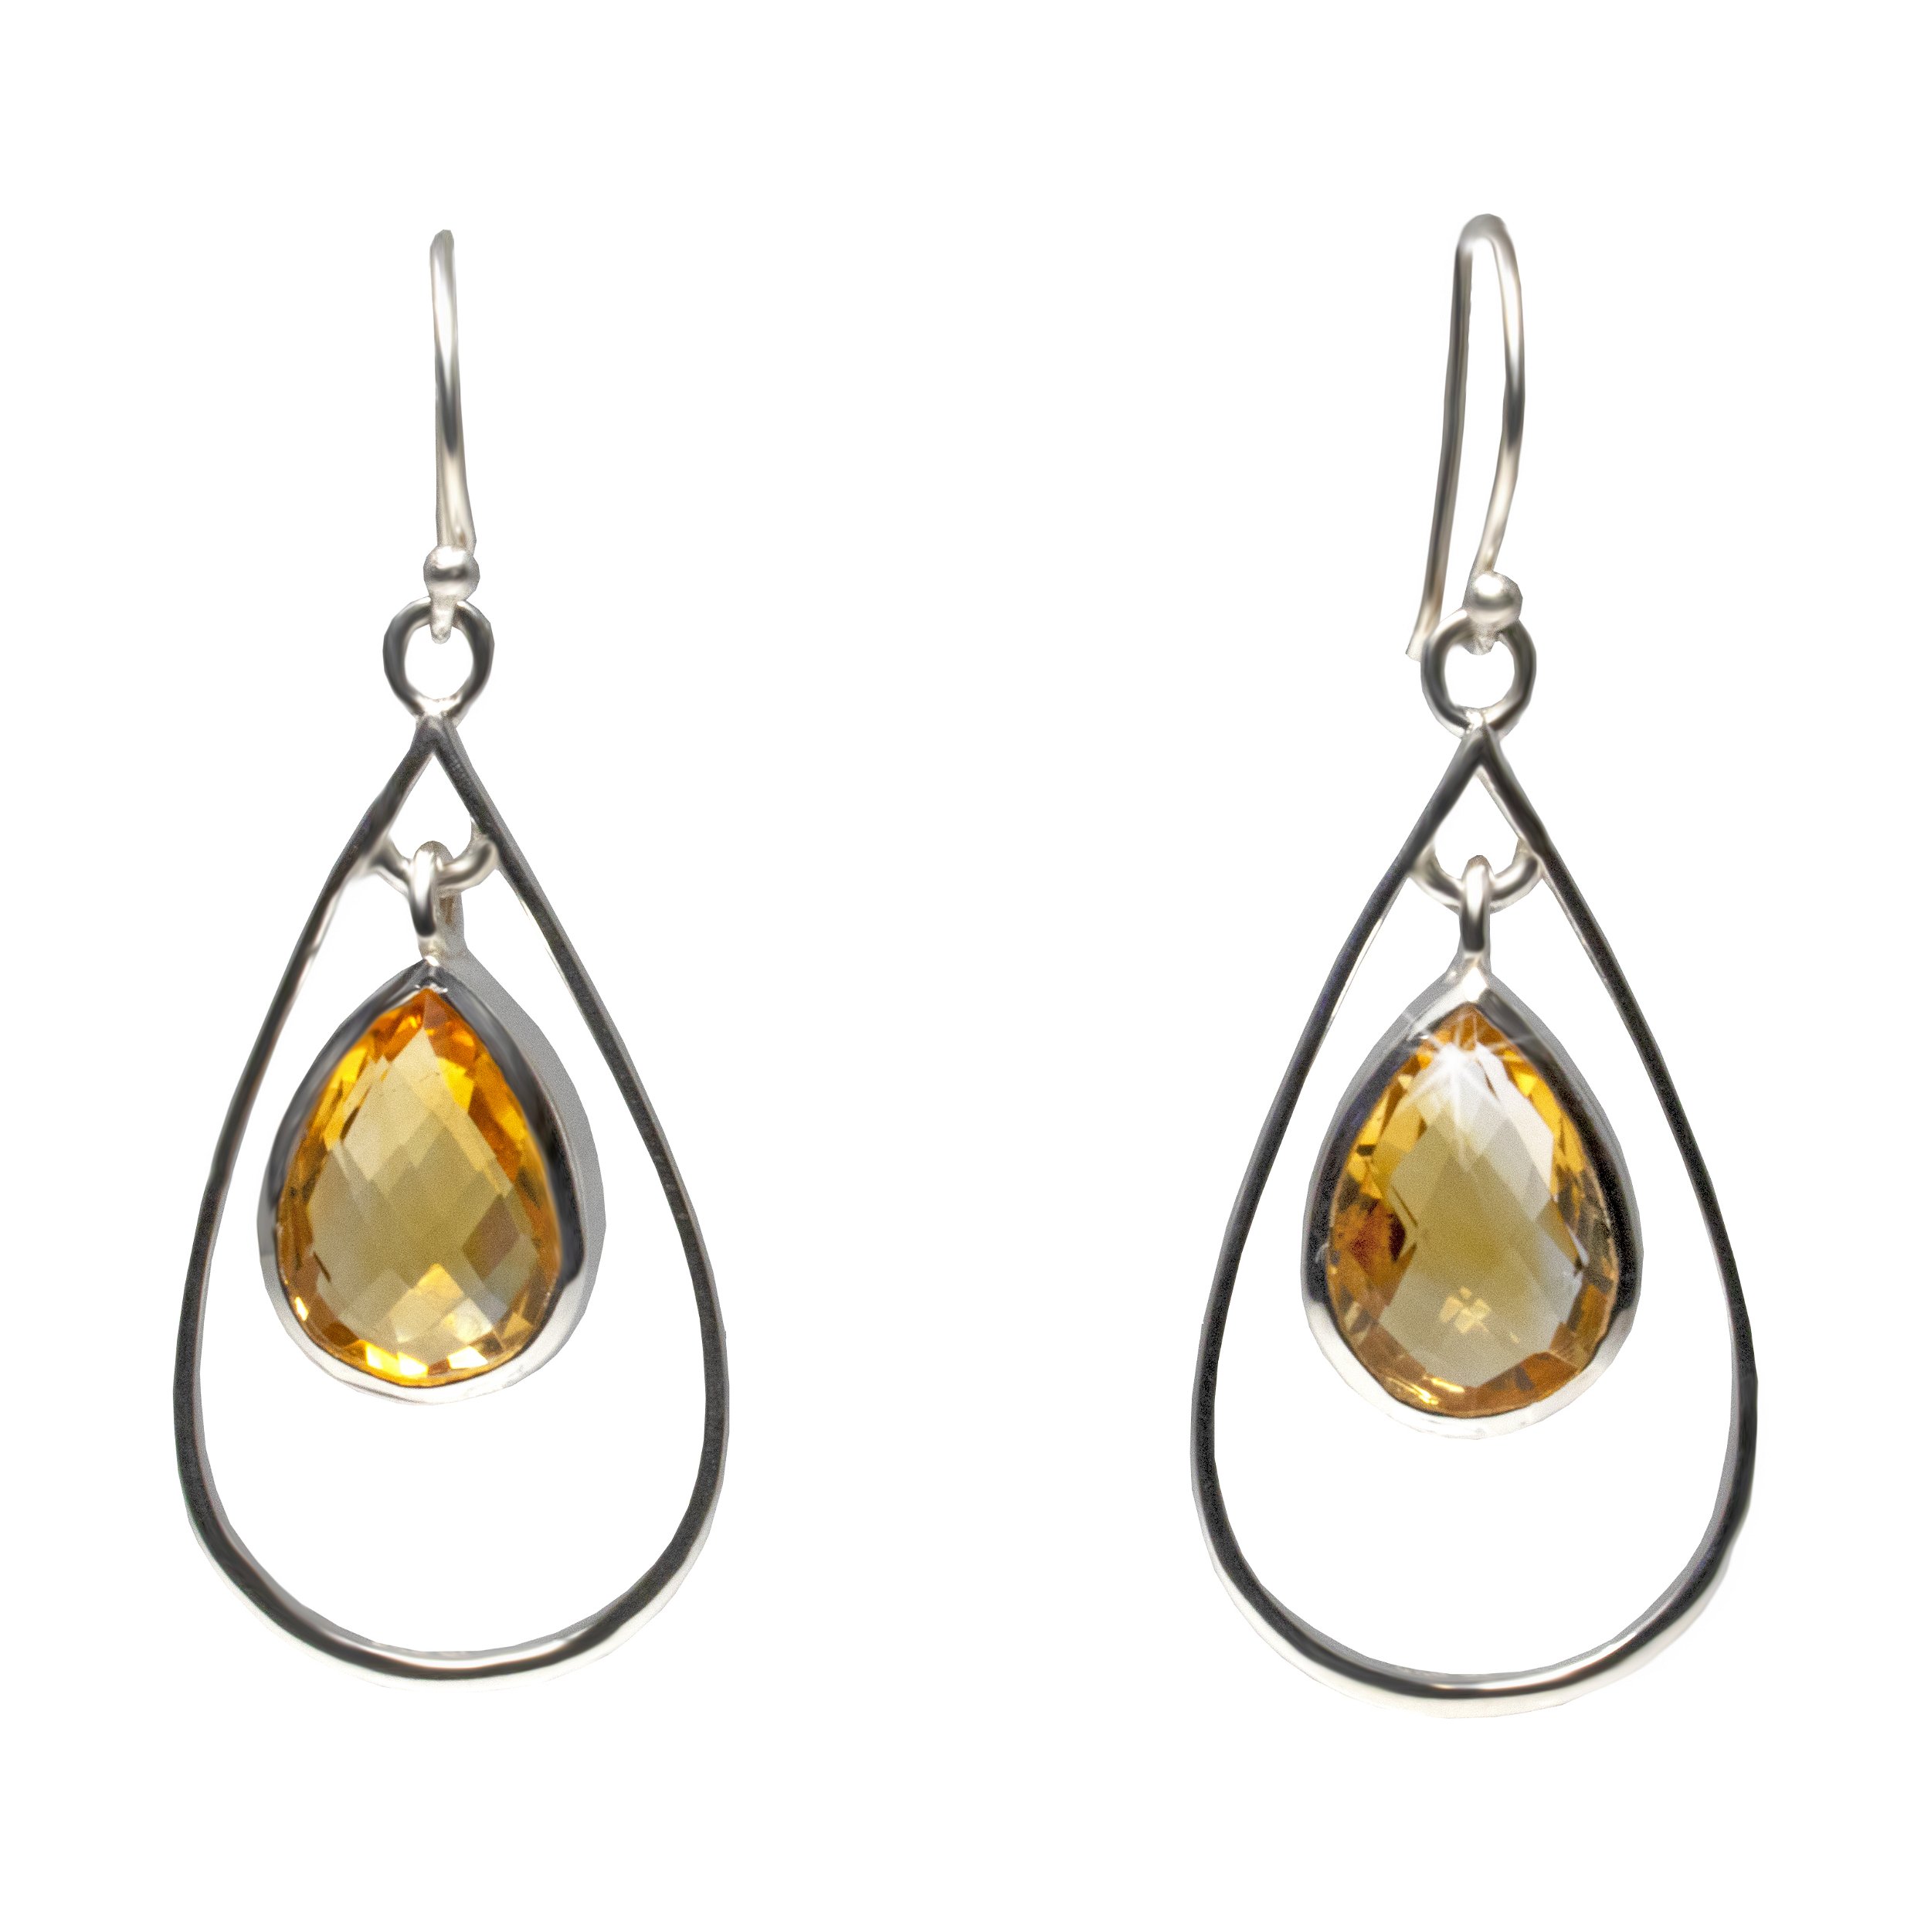 Faceted Citrine Dangle Earrings - Pear With Silver Bezel Dangling In Silver Wire Pear